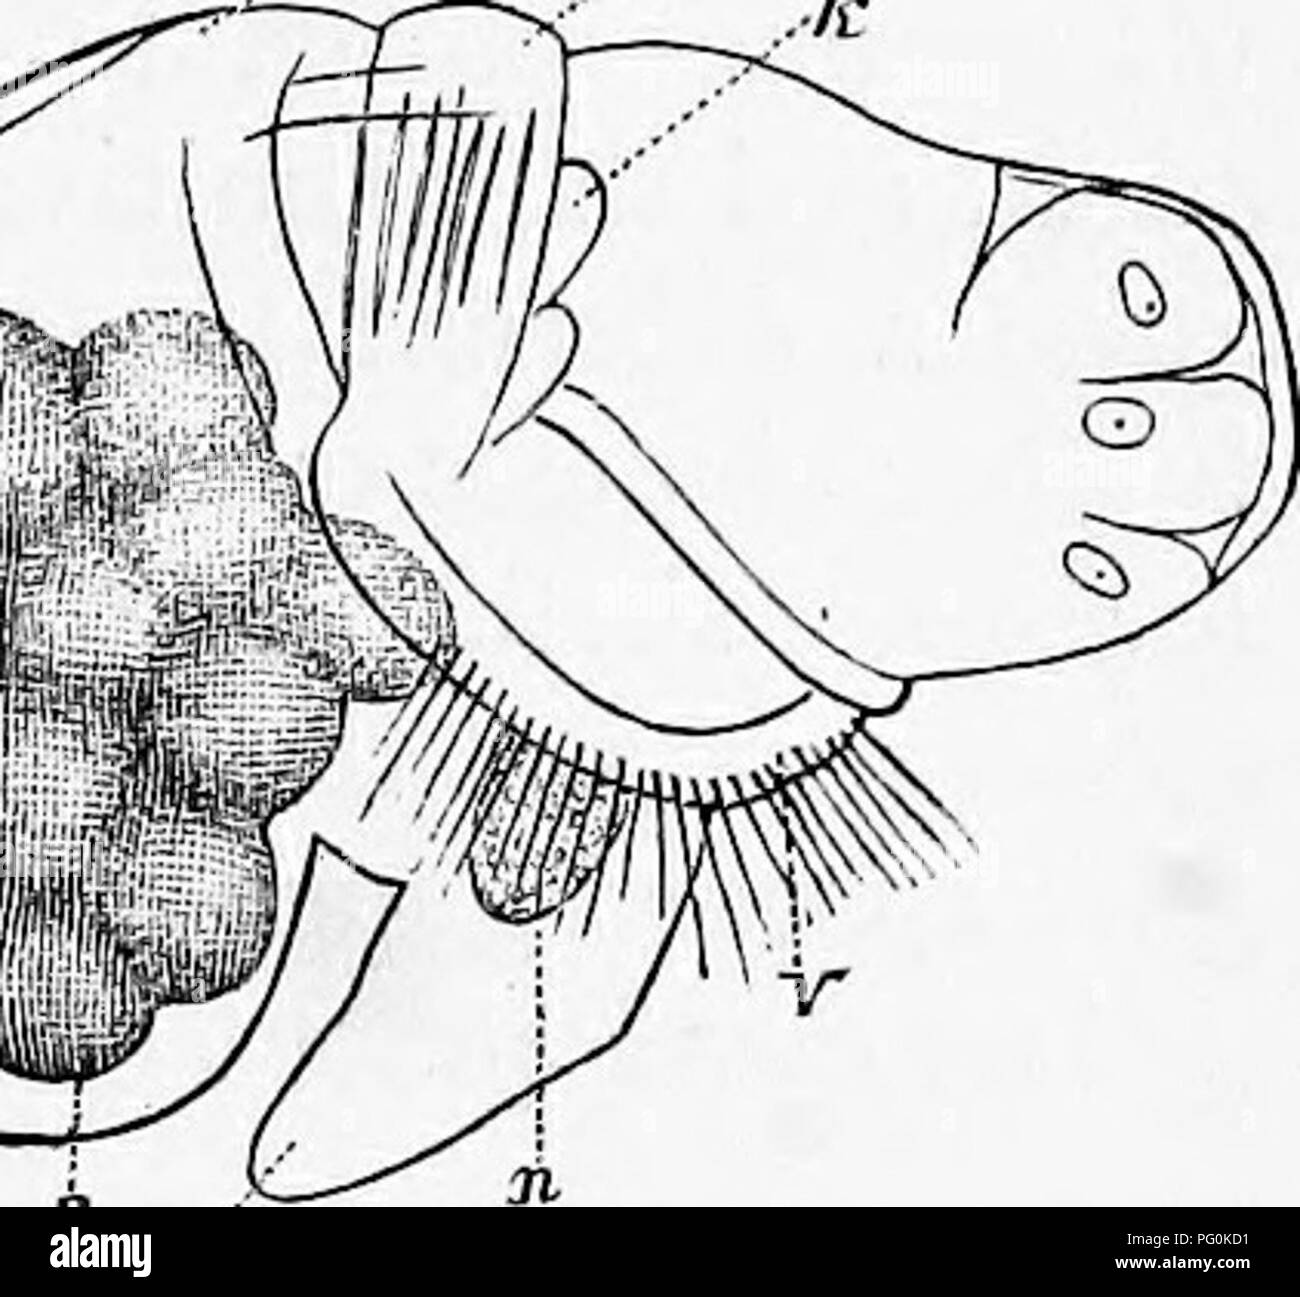 . Zoology : for students and general readers . Zoology. Pig. 'iSO.—Furpnra, and Its egg capsules, the latter enlarged.— After Morse. Fis. 191.. &gt;A». r Fig. 198. Fig. yi.—Calyptroia striata, natural size.—After Morse. Fig. 193.—Veliger of Calyptrma. /, foot; ti, velum ; m, mouth ; ce, ectoderm ;'«, mesoderm.—After Salensky. Fig. 19.3.—Veliger of Calyptrma farther advanced, m, mantle ; v, velum ; /, foot; h, larval heart; n, permanent; *, primitive kidney; s, crosses the shell and rests on the yolk.—After Salensky. According to Salensky, after segmentation of the yolk into eight cells the fi Stock Photo